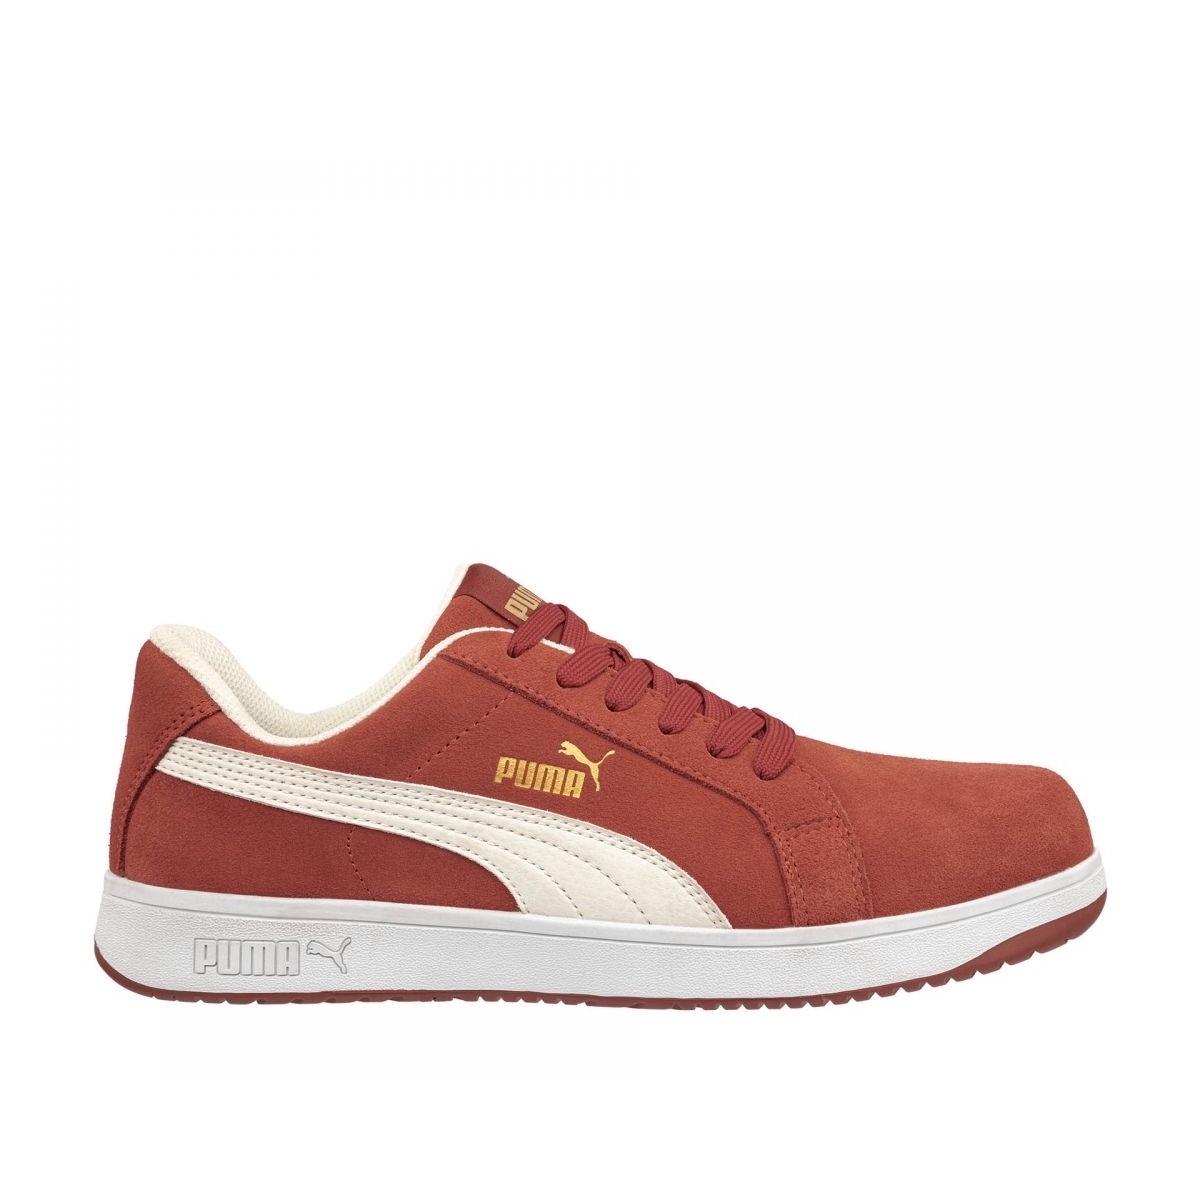 PUMA Safety Women's Iconic Low Composite Toe EH Work Shoes Red Suede - 640135 RED - RED, 8.5